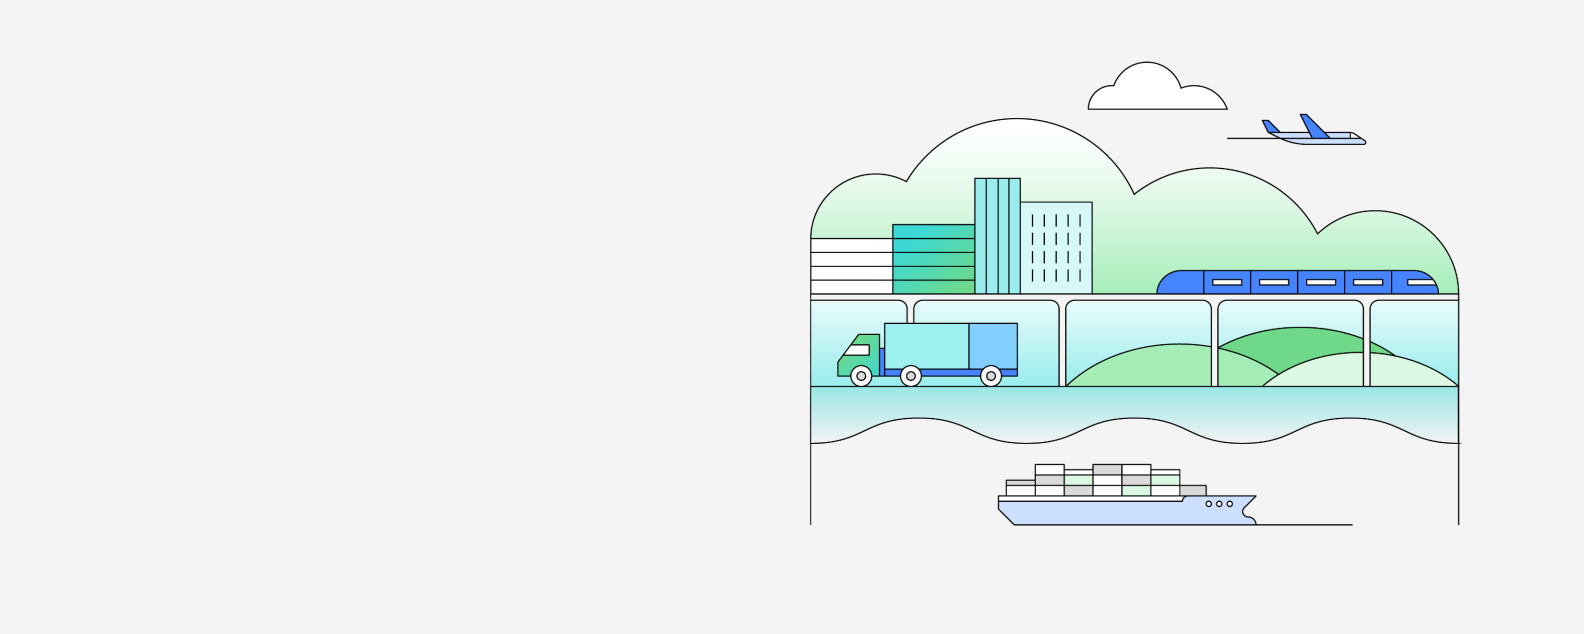 Graphic illustration representing transportation asset management with the IBM Maximo Application Suite